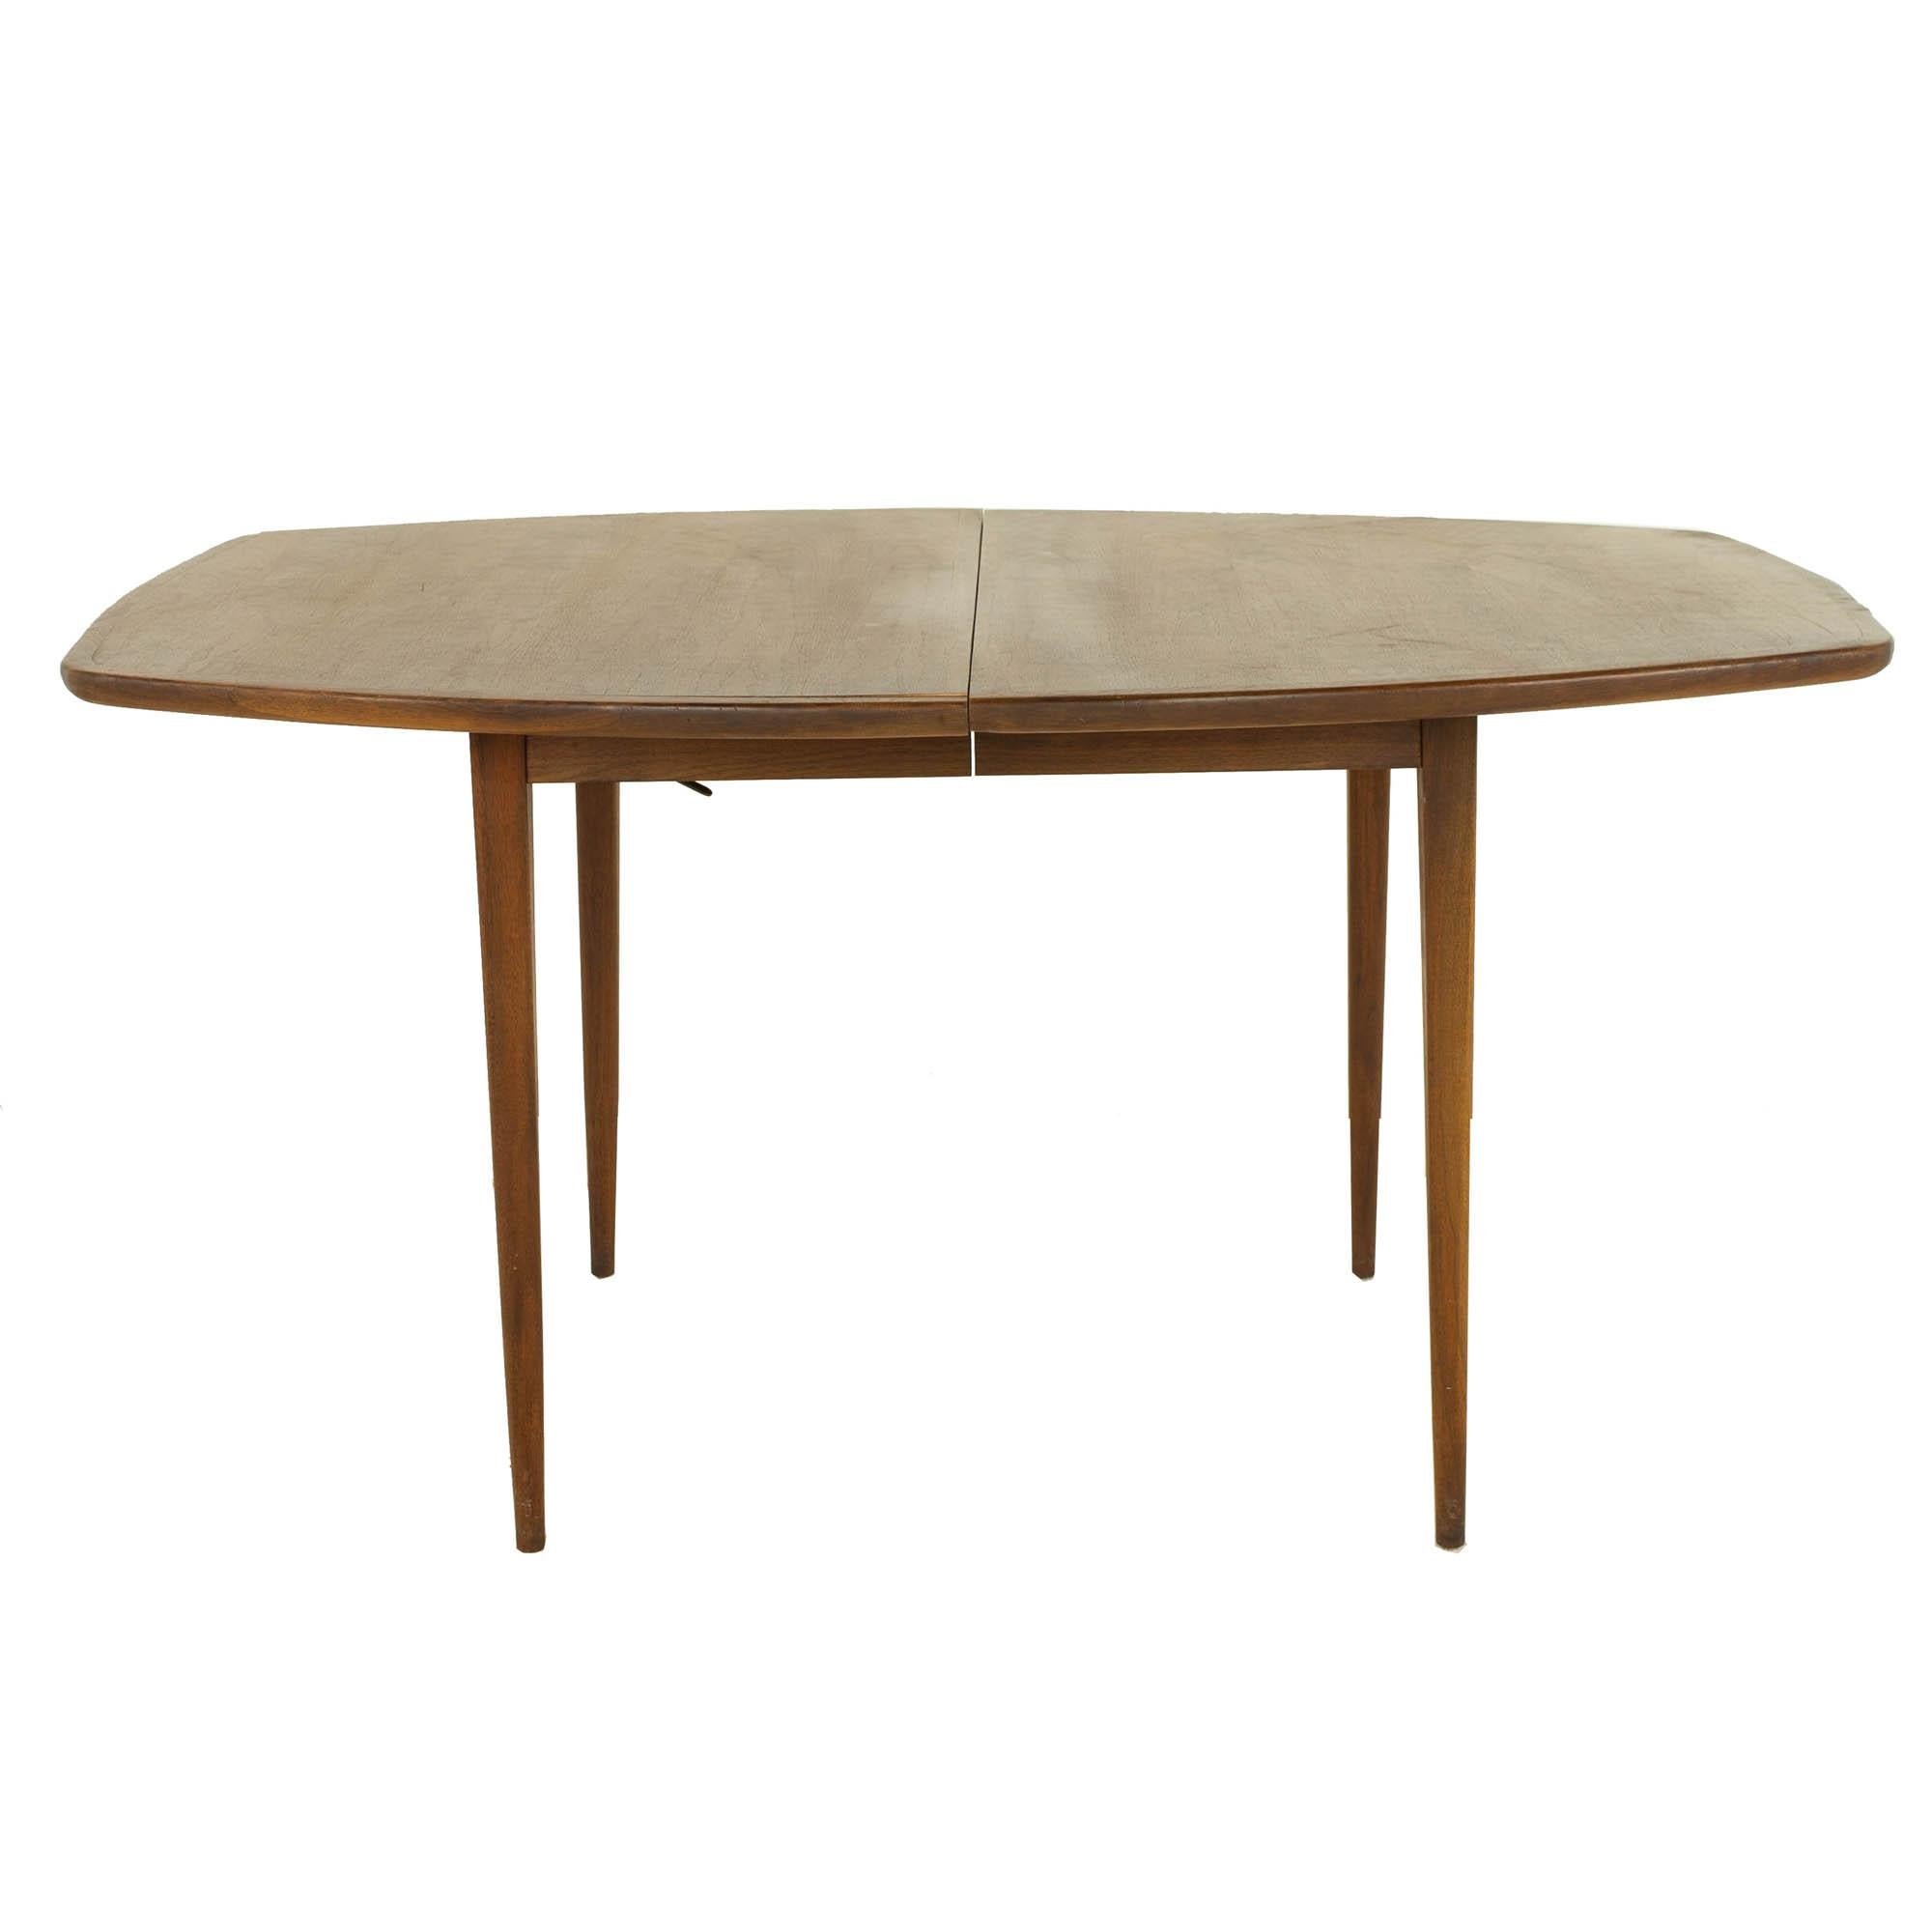 Dillingham mid century surfboard walnut dining table

This table measures: 58 wide x 40 deep x 30 inches high, with a chair clearance of 28.5 inches, each of the two leaves measure 18 inches wide, making a maximum table width of 94 inches

?All